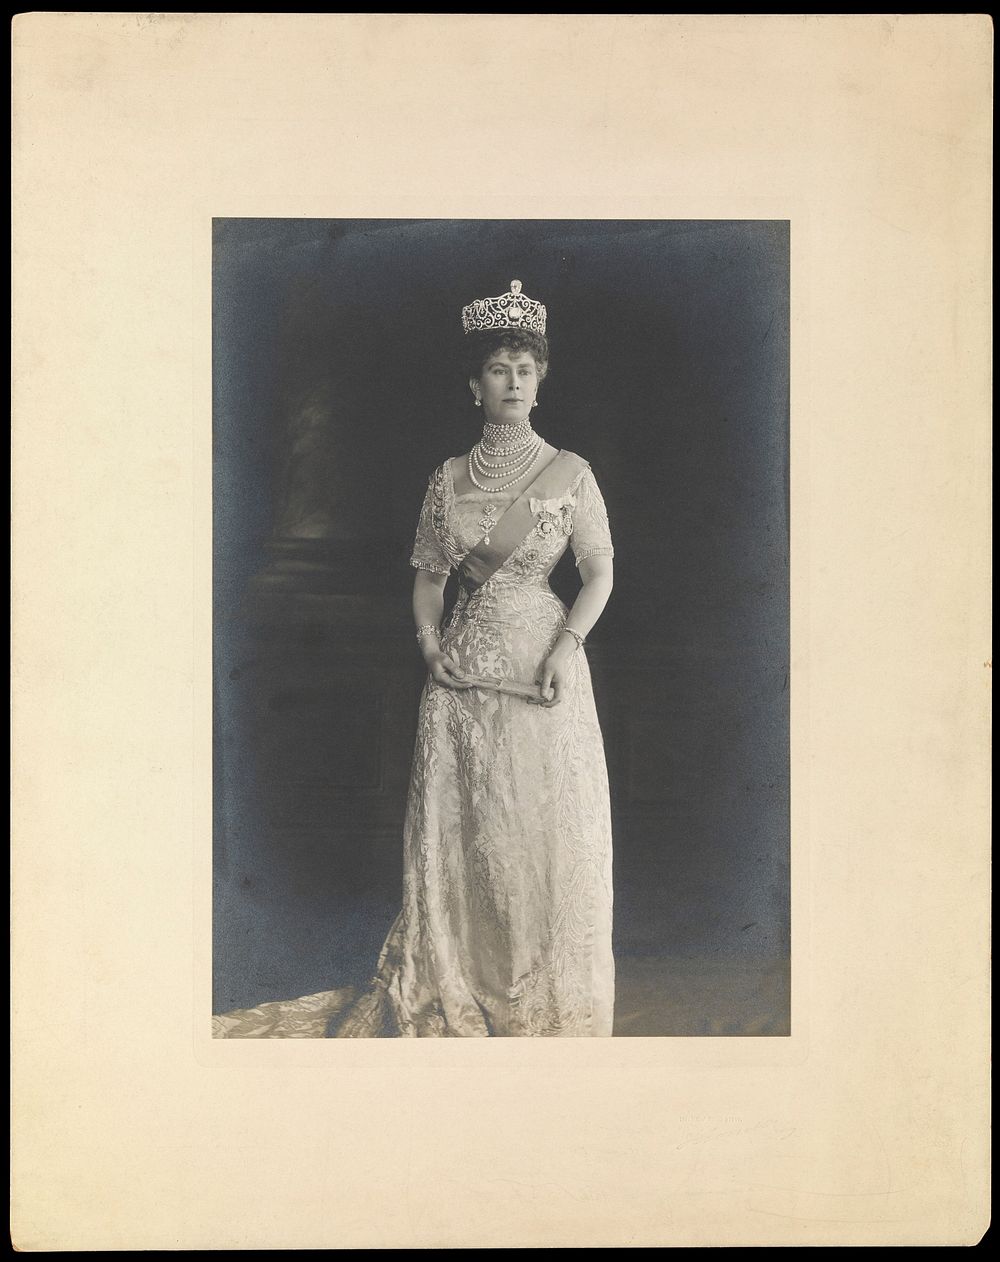 Queen Mary (May of Teck) standing, wearing a tiara and holding a folded fan. Photograph by John Thomson, ca. 1910.